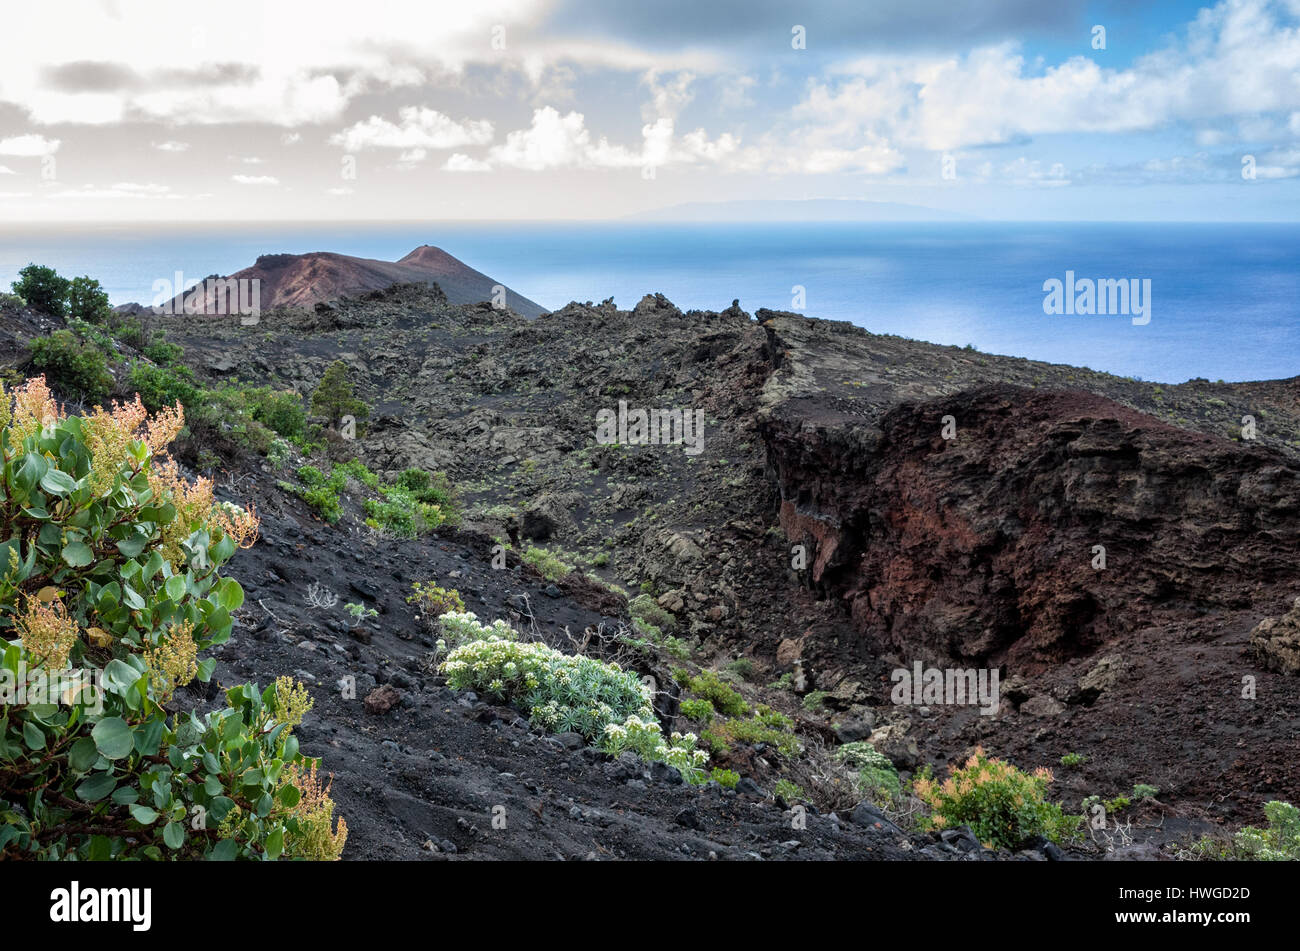 Cumbre Vieja, Fuencaliente. La Palma.  A view along the volcano's winding ridge and geological land formation. Very little vegetation grows in the lava rock of Cumbre Vieja region.  It's a bright day with fast moving clouds. Stock Photo